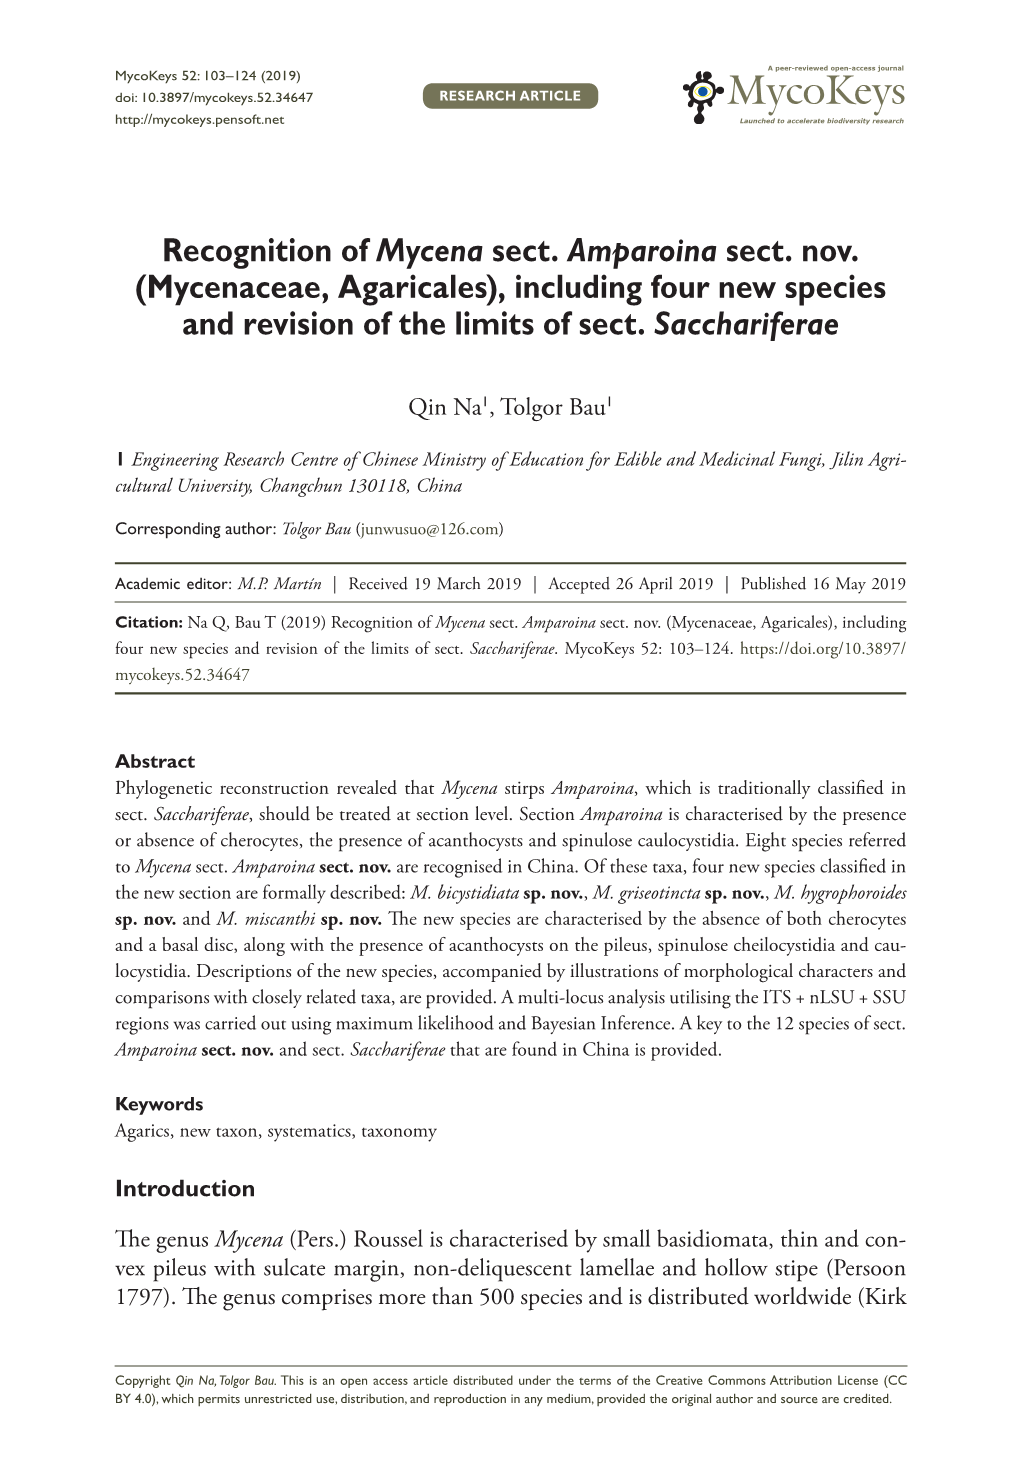 Recognition of Mycena Sect. Amparoina Sect. Nov. (Mycenaceae, Agaricales), Including Four New Species and Revision of the Limits of Sect